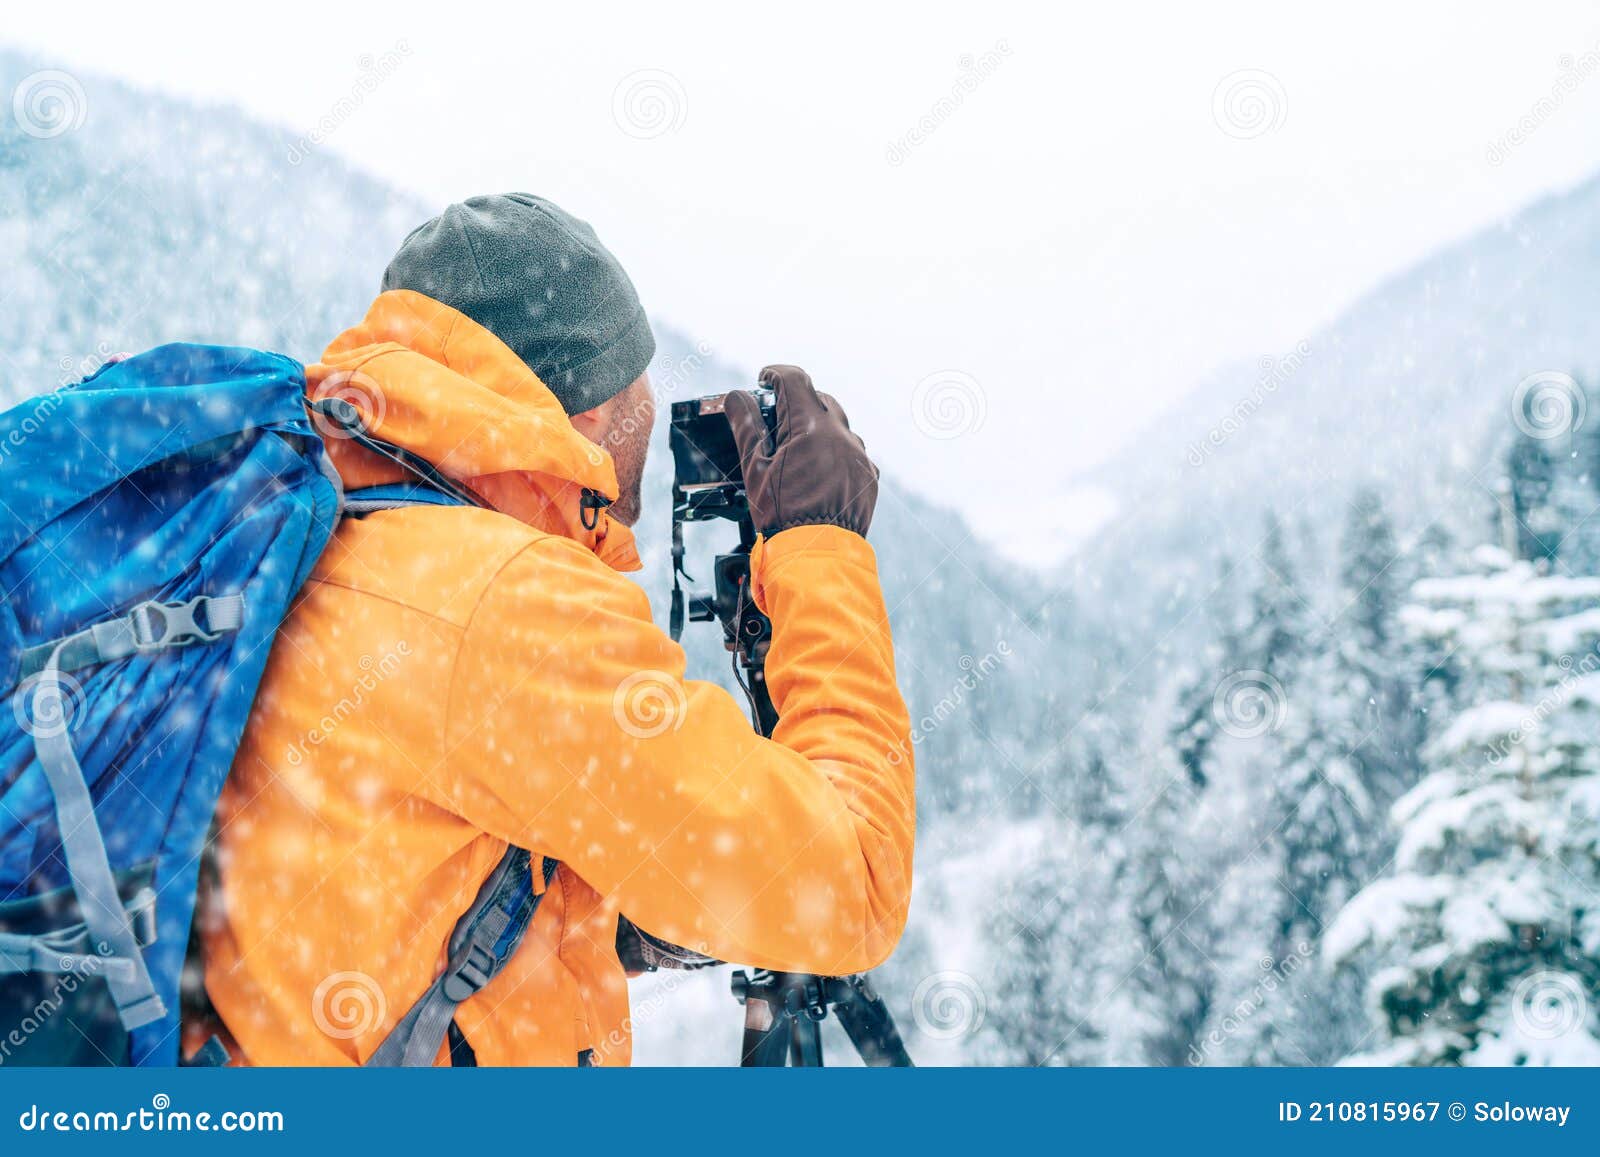 photographer dressed orange softshell jacket with backpack making a landscape shoot using a digital camera and tripod while he